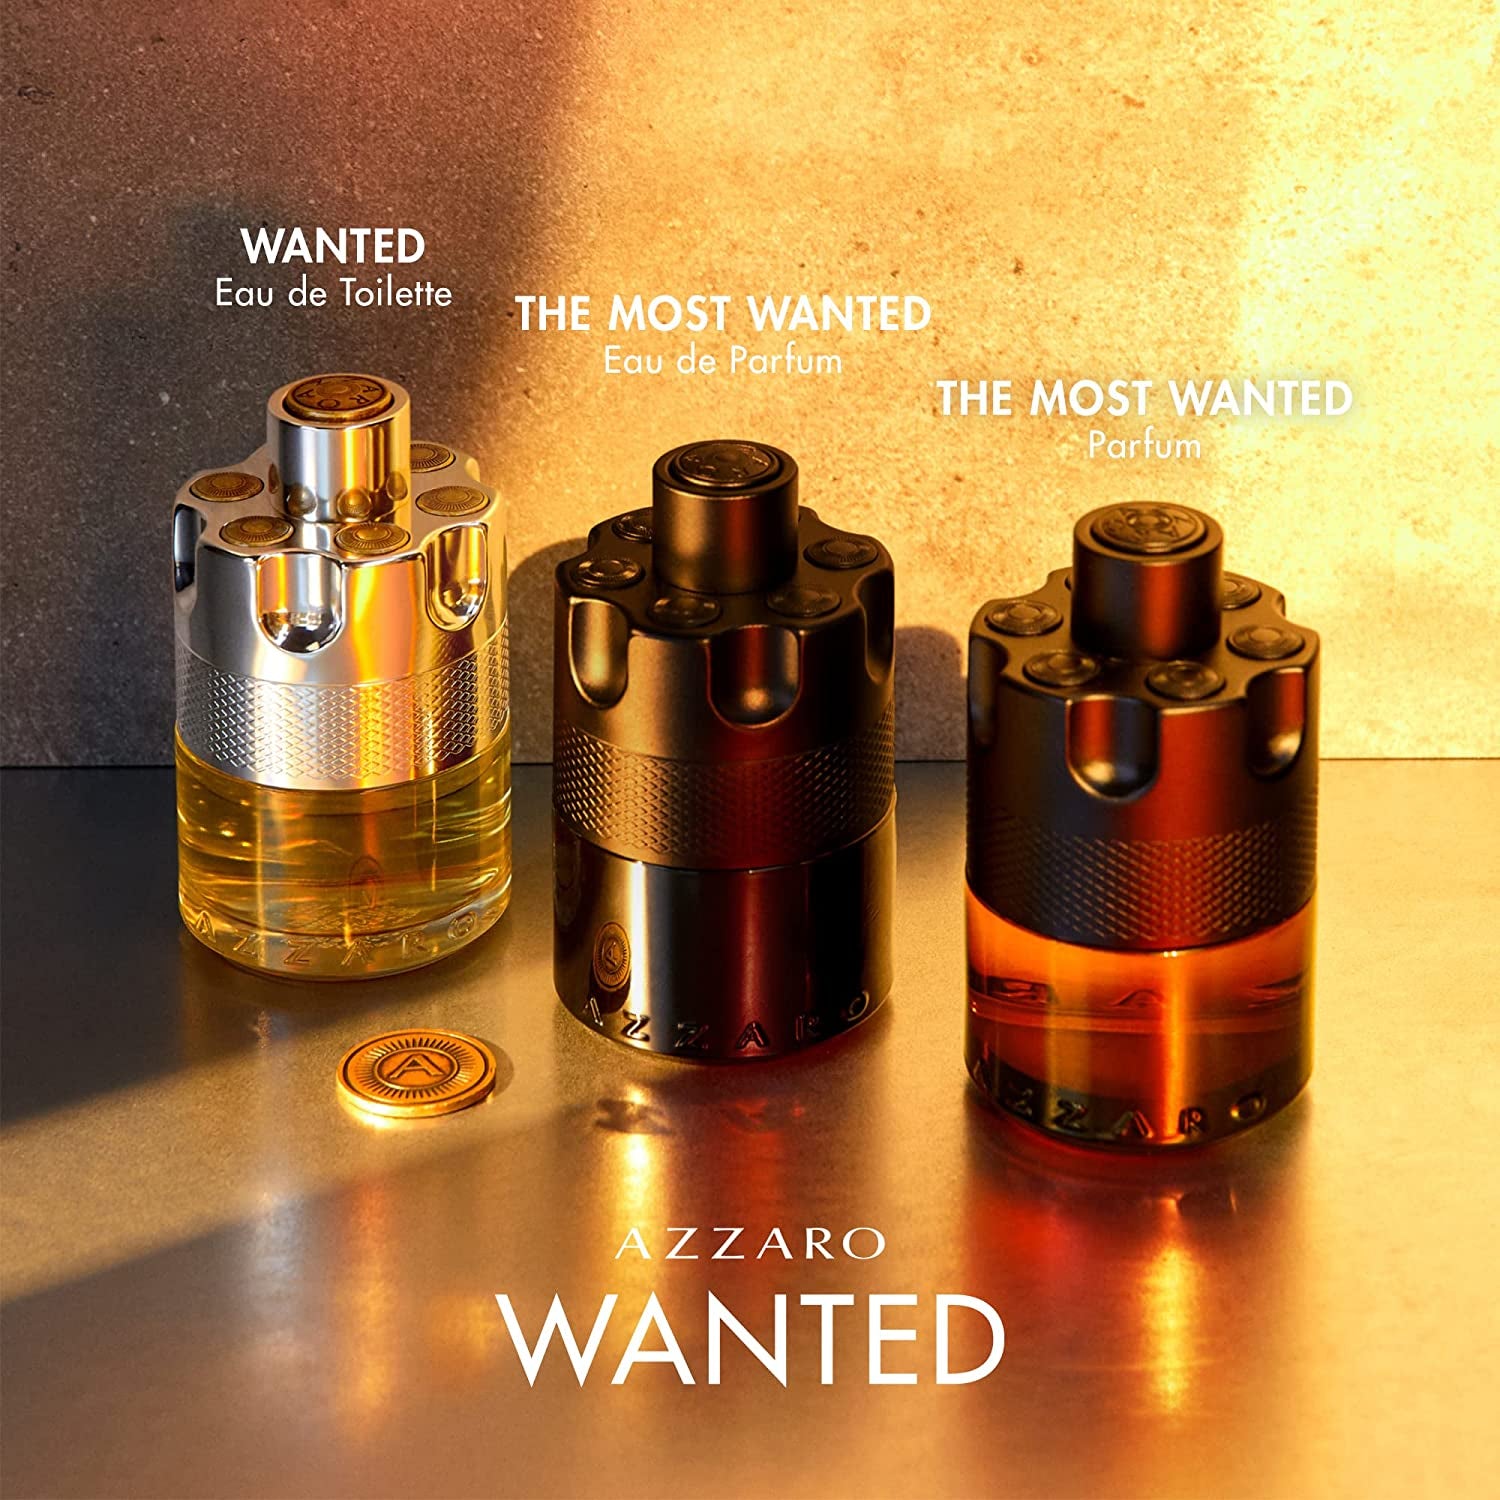 the Most Wanted Eau De Parfum Intense - Seductive Mens Cologne - Fougère, Ambery & Spicy Fragrance for Date - Lasting Wear - Luxury Perfumes for Men